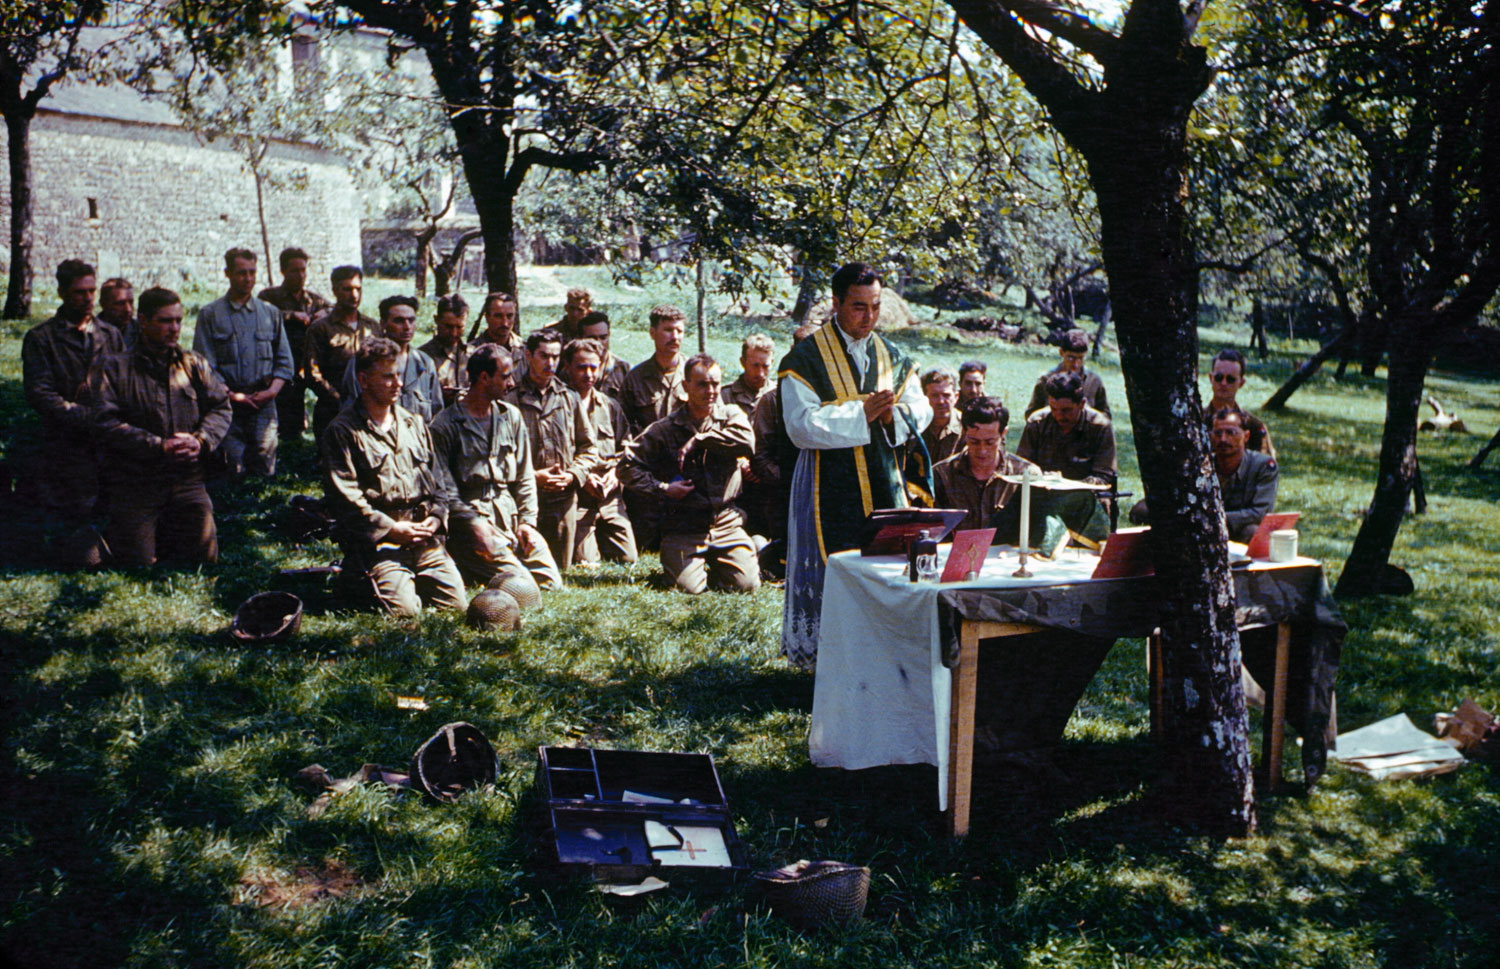 Church services in dappled sunlight, France, 1944.